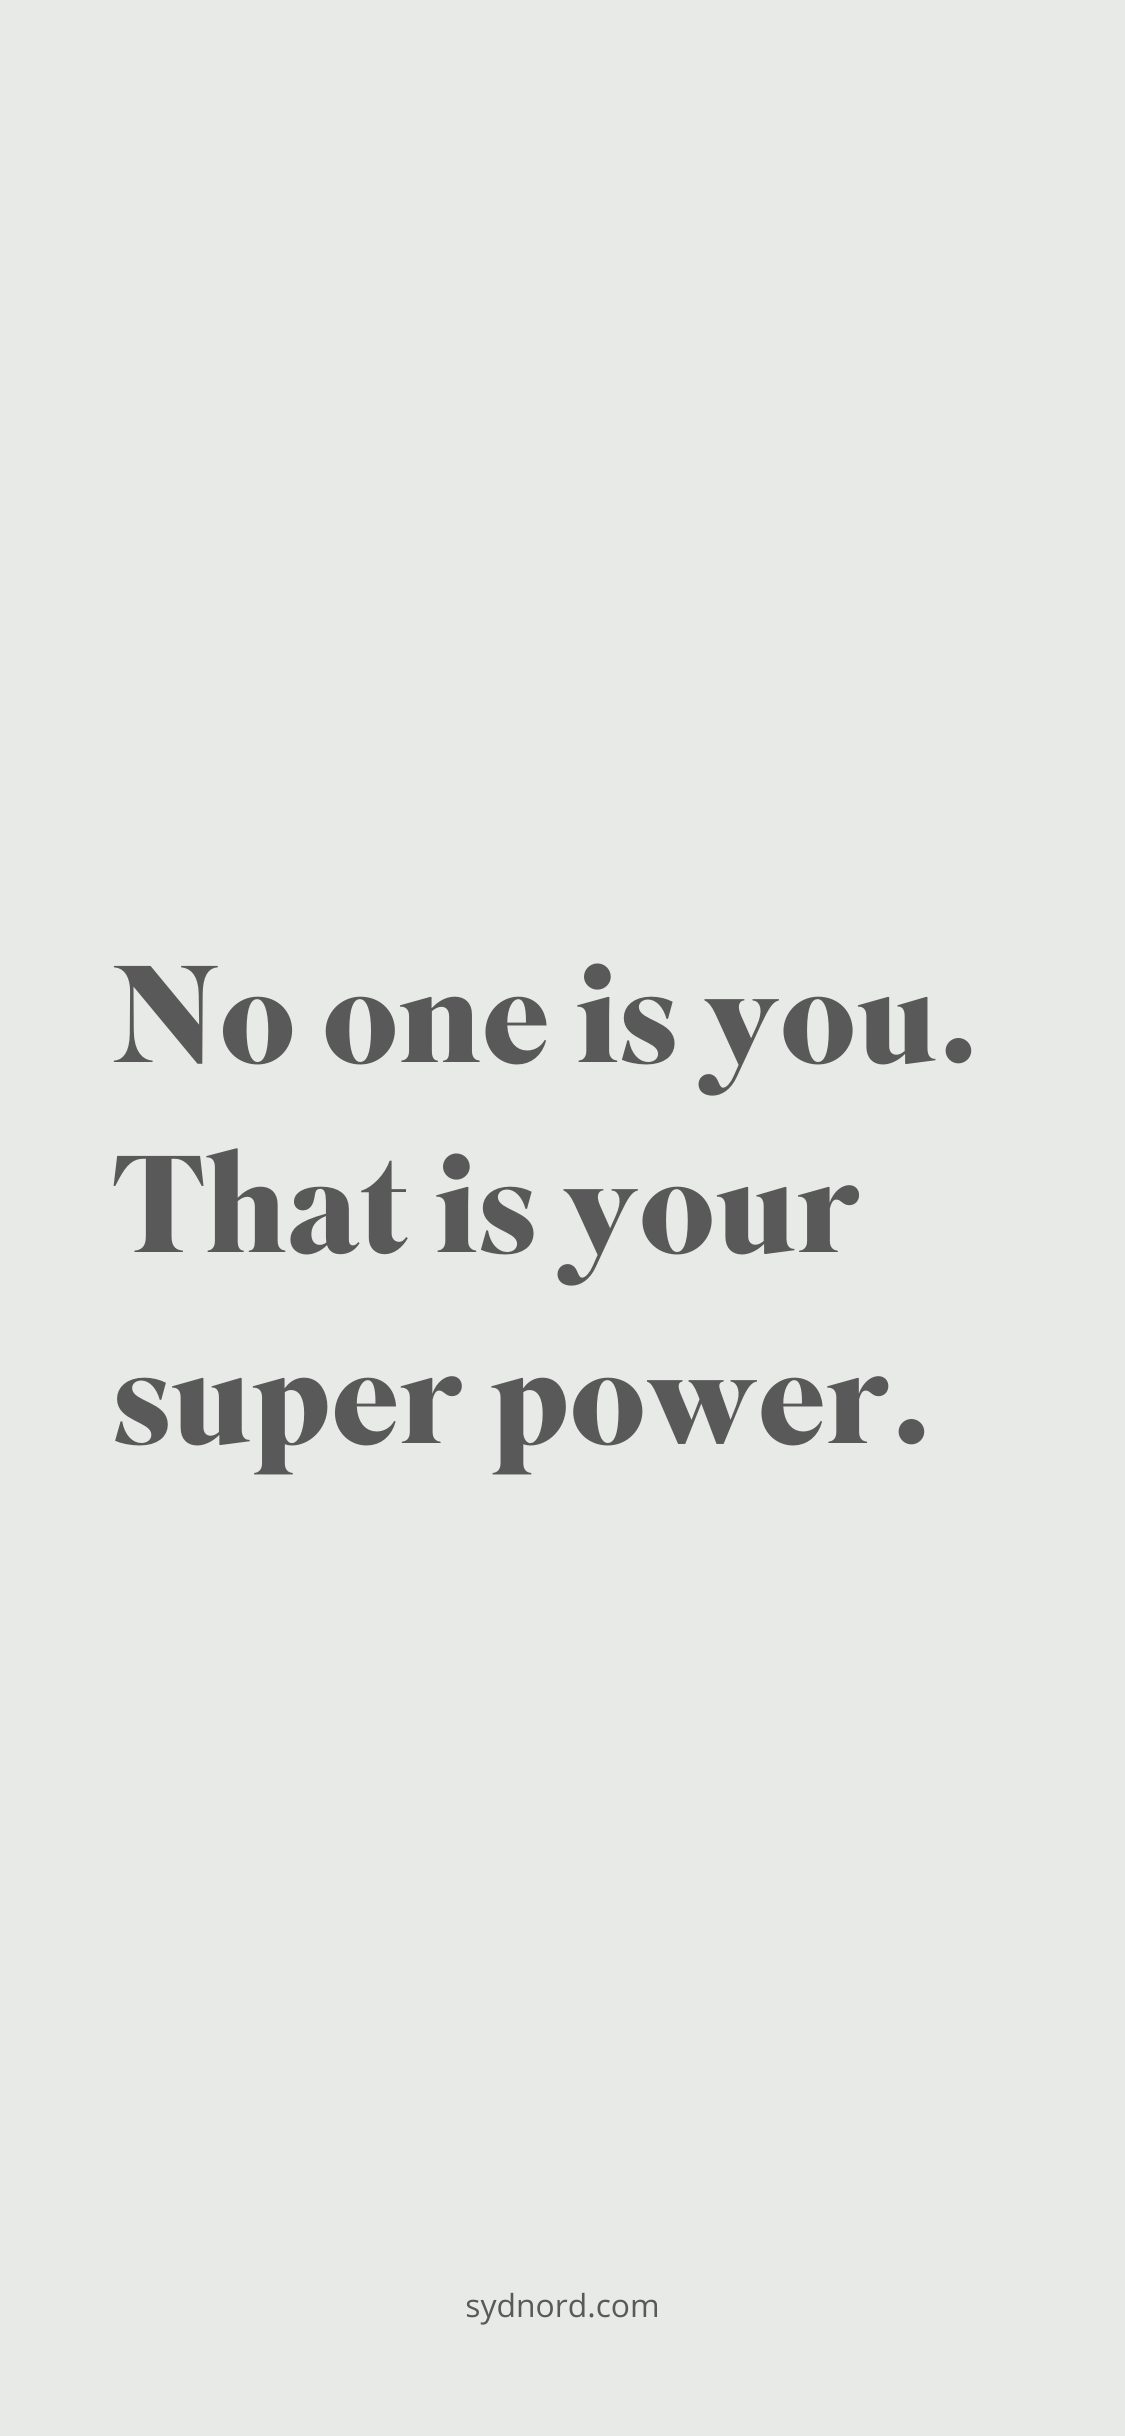 Positive quotes: No one is you. That is your super power.